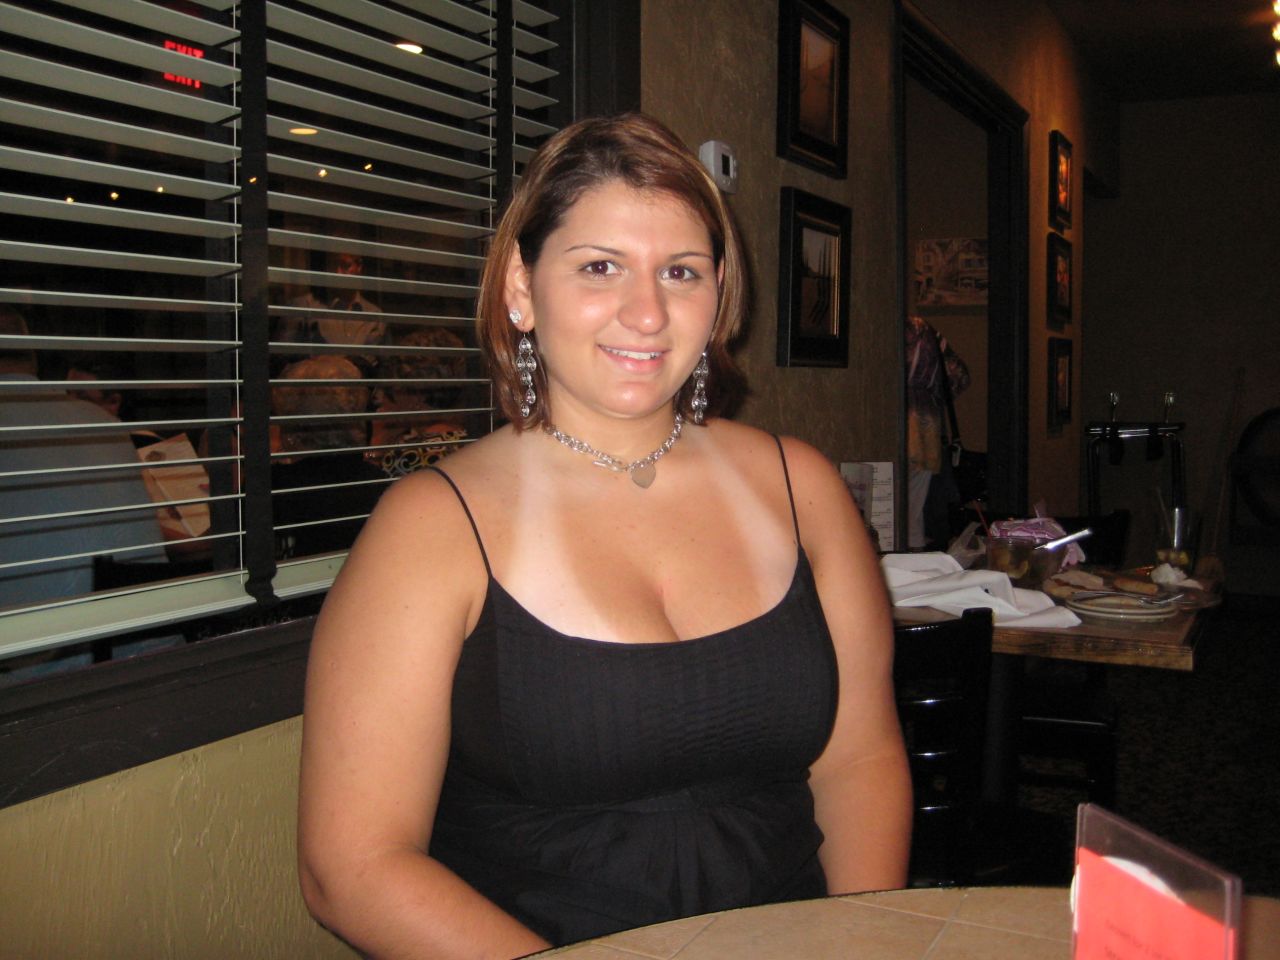 "This was in 2009, right after my college graduation. My cheeks are more round and I'm definitely a lot heavier."